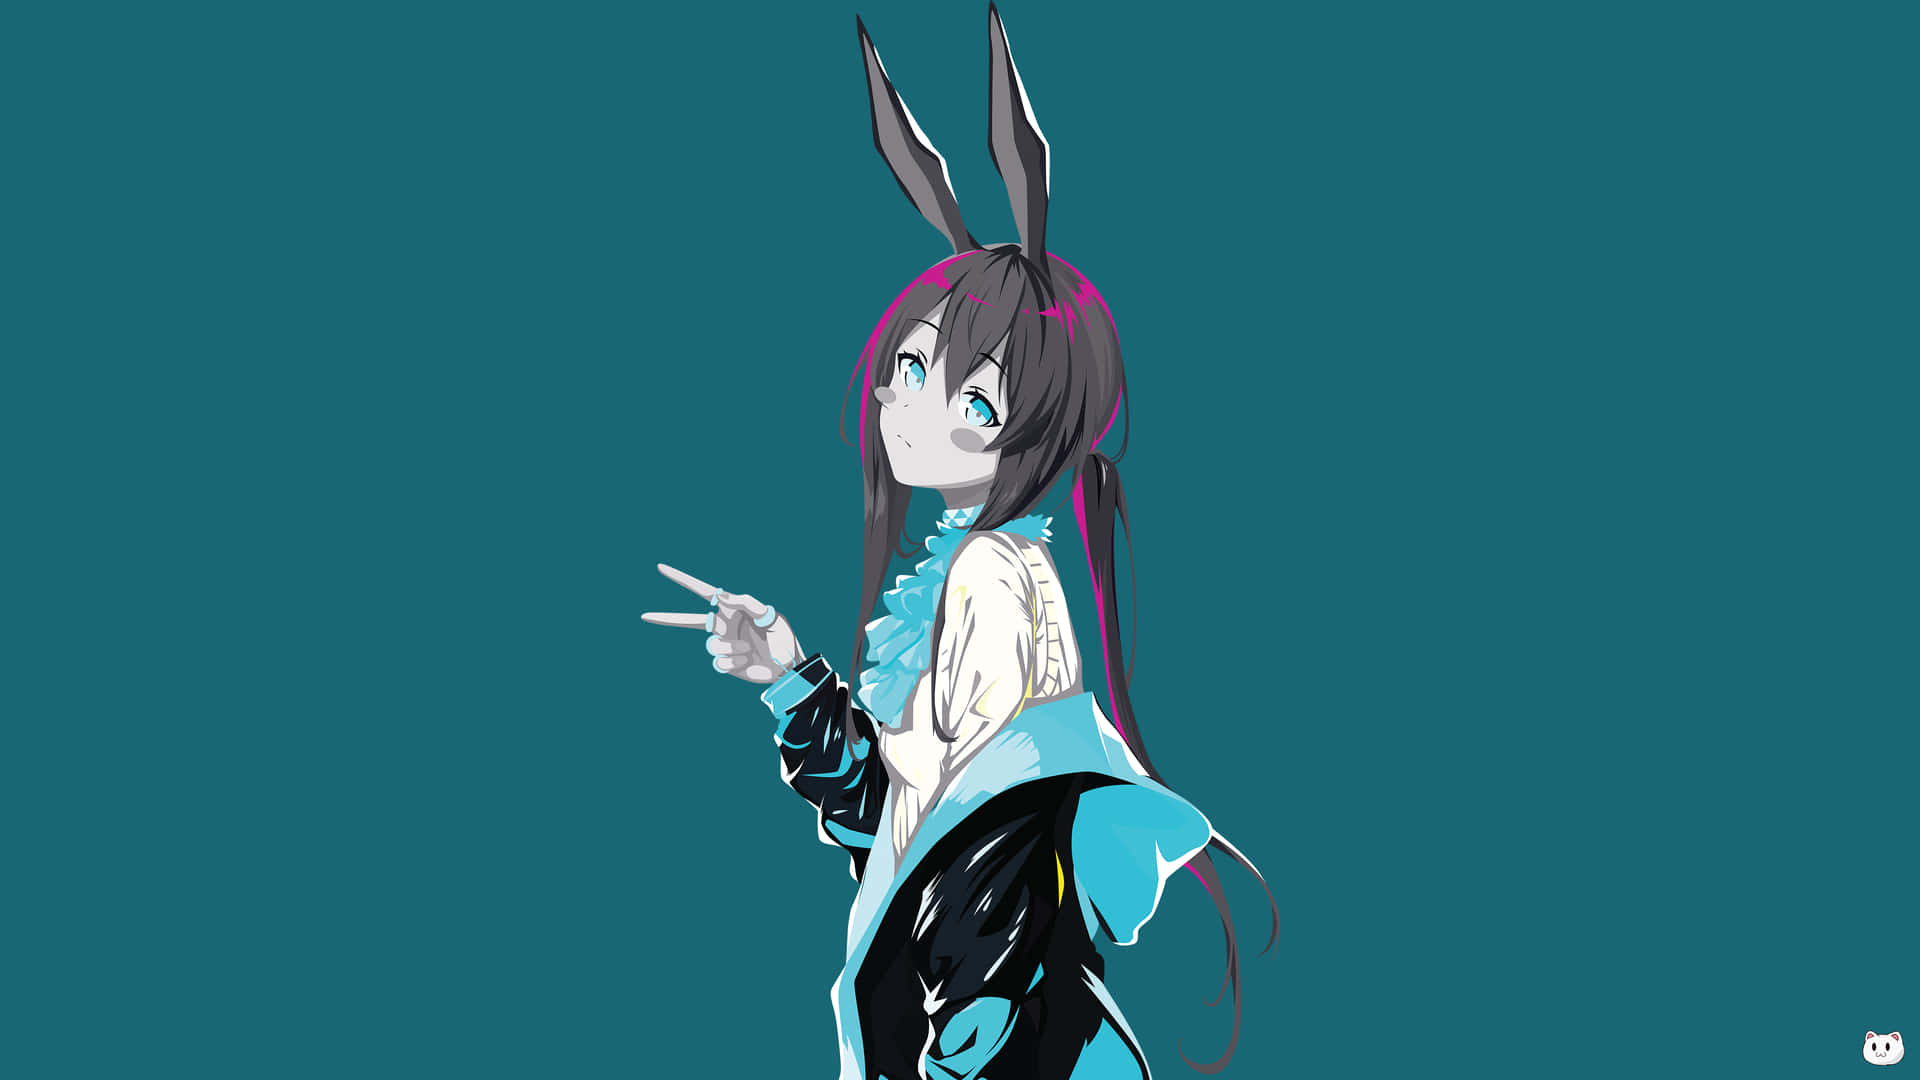 A Girl With Long Hair And Bunny Ears Wallpaper